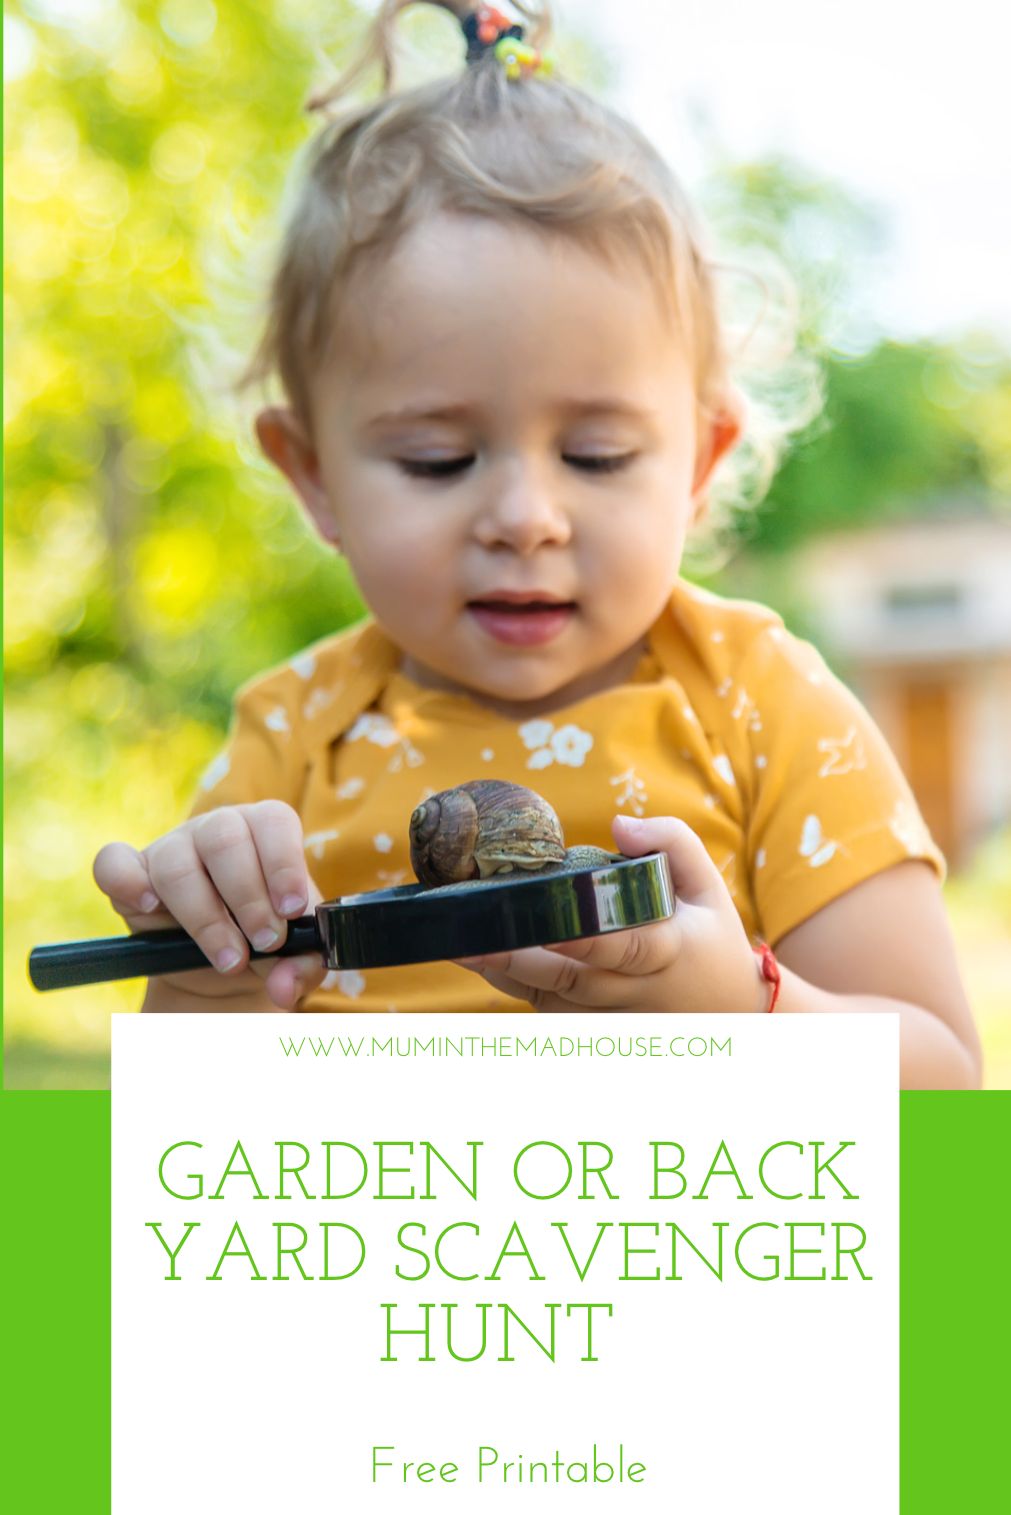 Get your kids outside for a fun summer activity! This garden scavenger hunt is an easy way to get kids engaged with nature. With tips and ideas for a successful hunt, it’s a great way to keep kids entertained this summer. Start searching now!